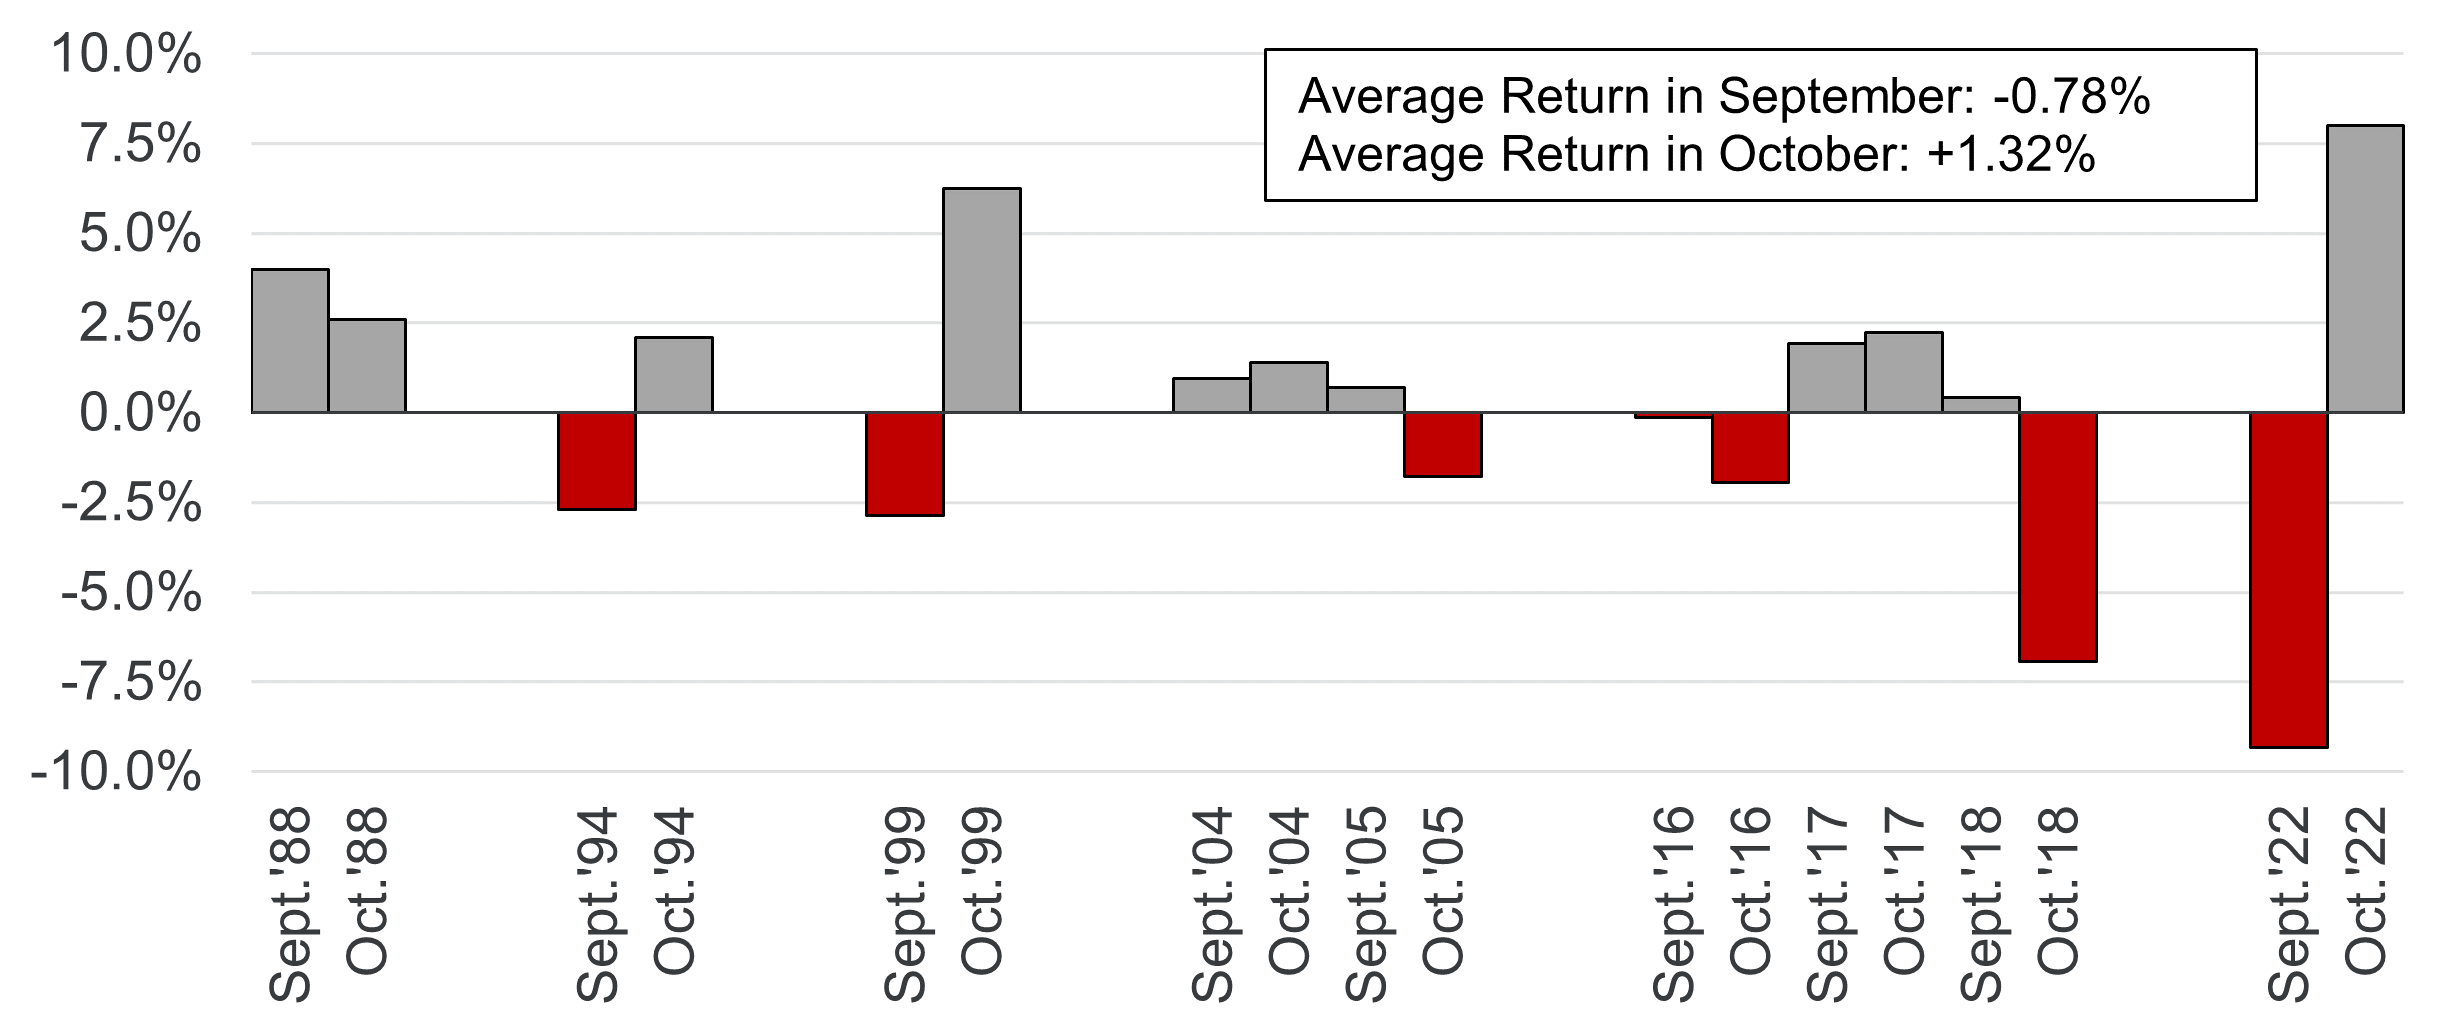 S&P 500 Index Total Returns in September and October During Prior Rate Hiking Cycles Dating Back to 1988